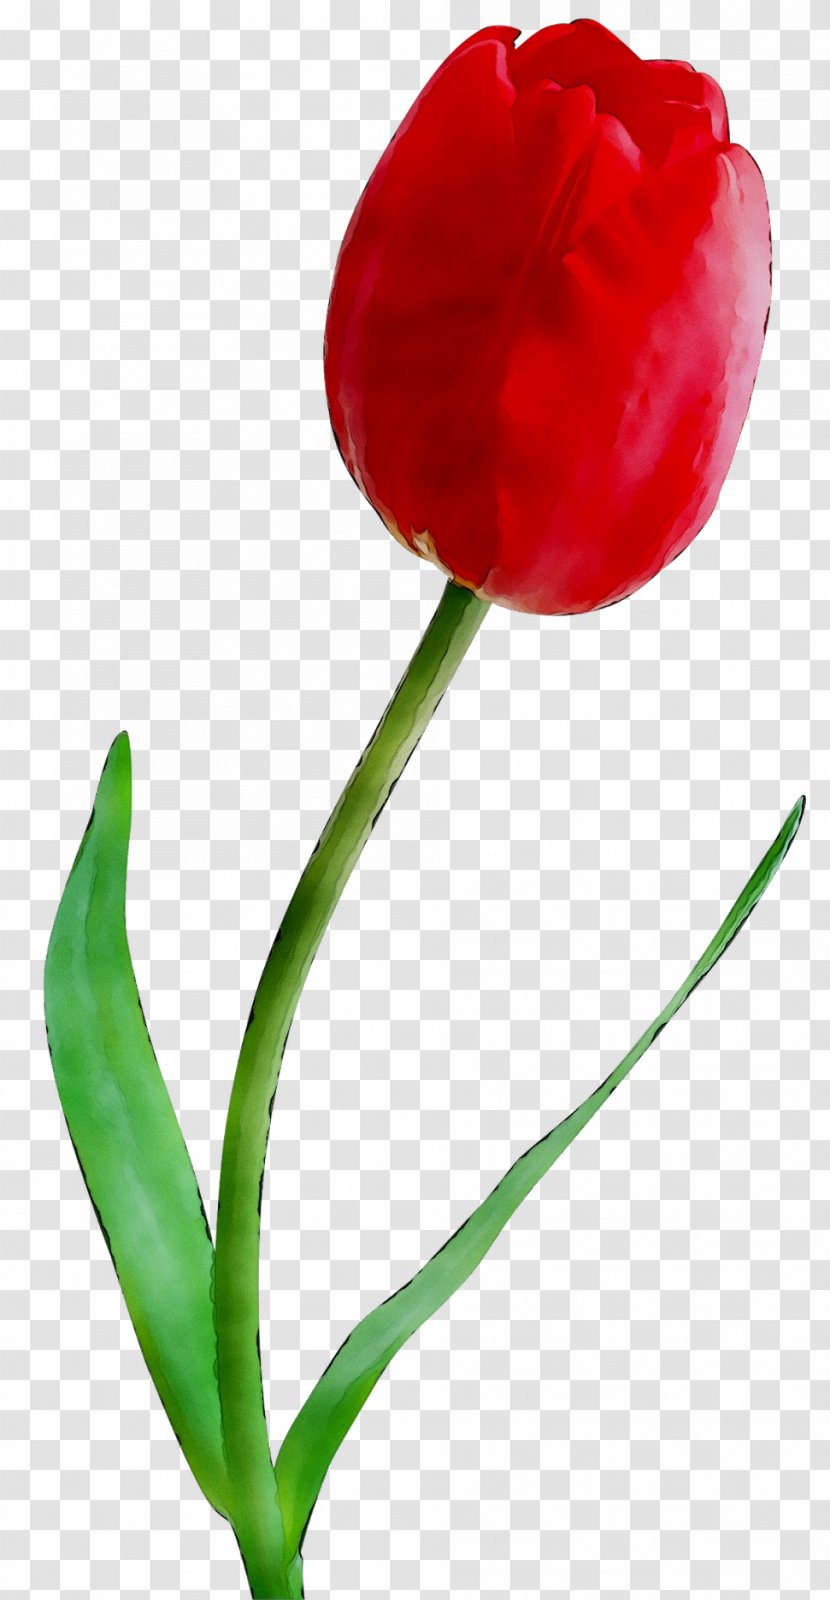 Tulip Cut Flowers Plant Stem Bud Peppers - Red - Flower Transparent PNG